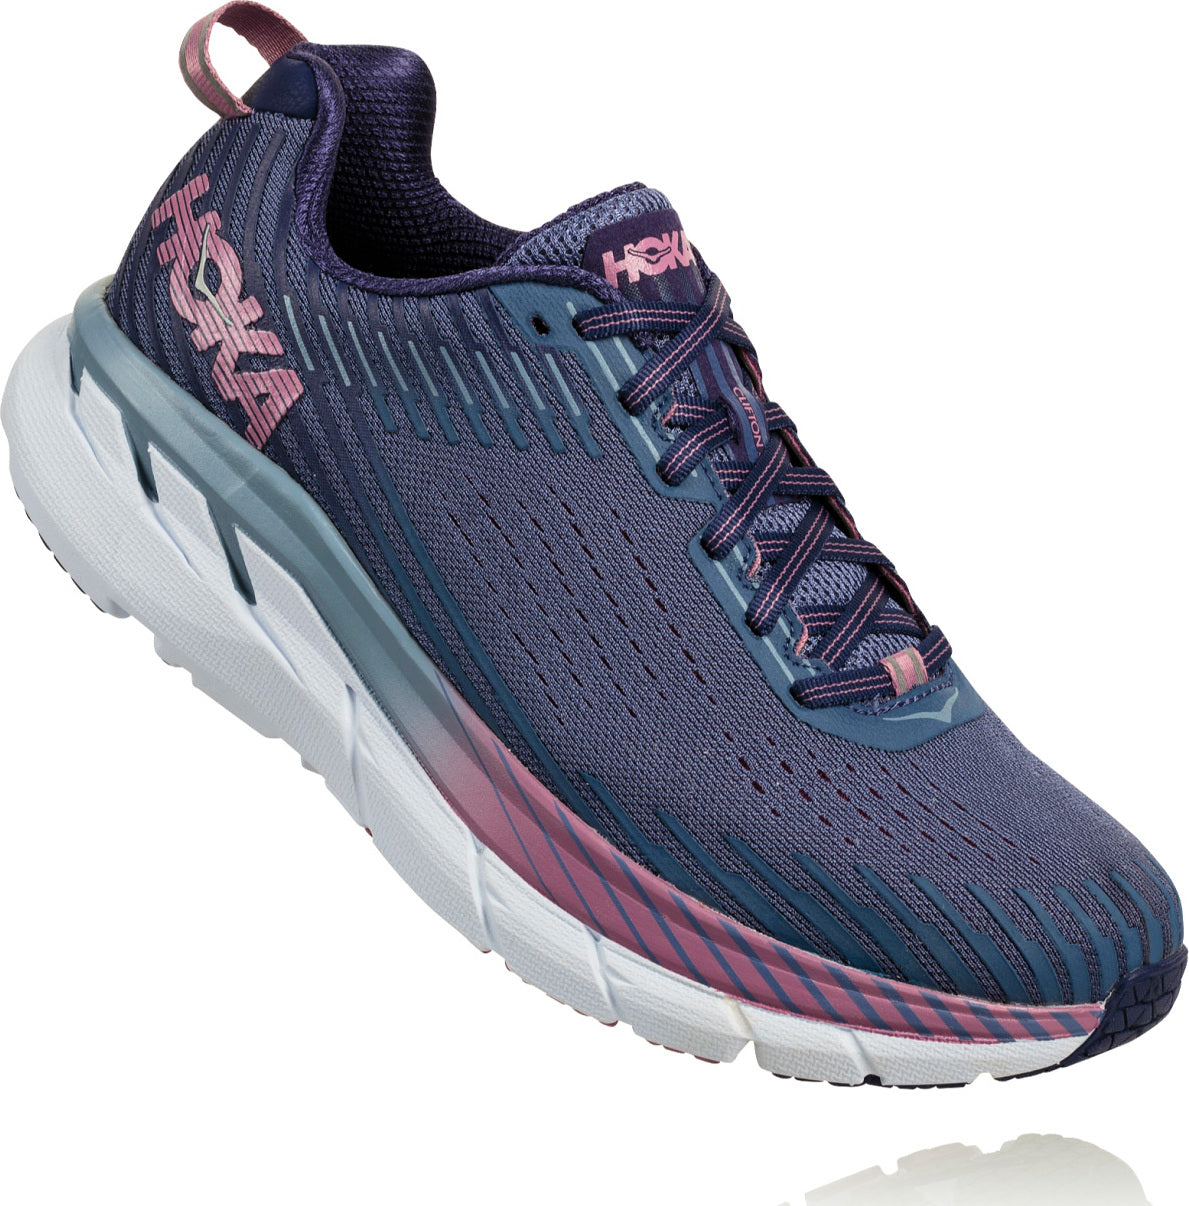 Clifton 5 Wide Running Shoes 